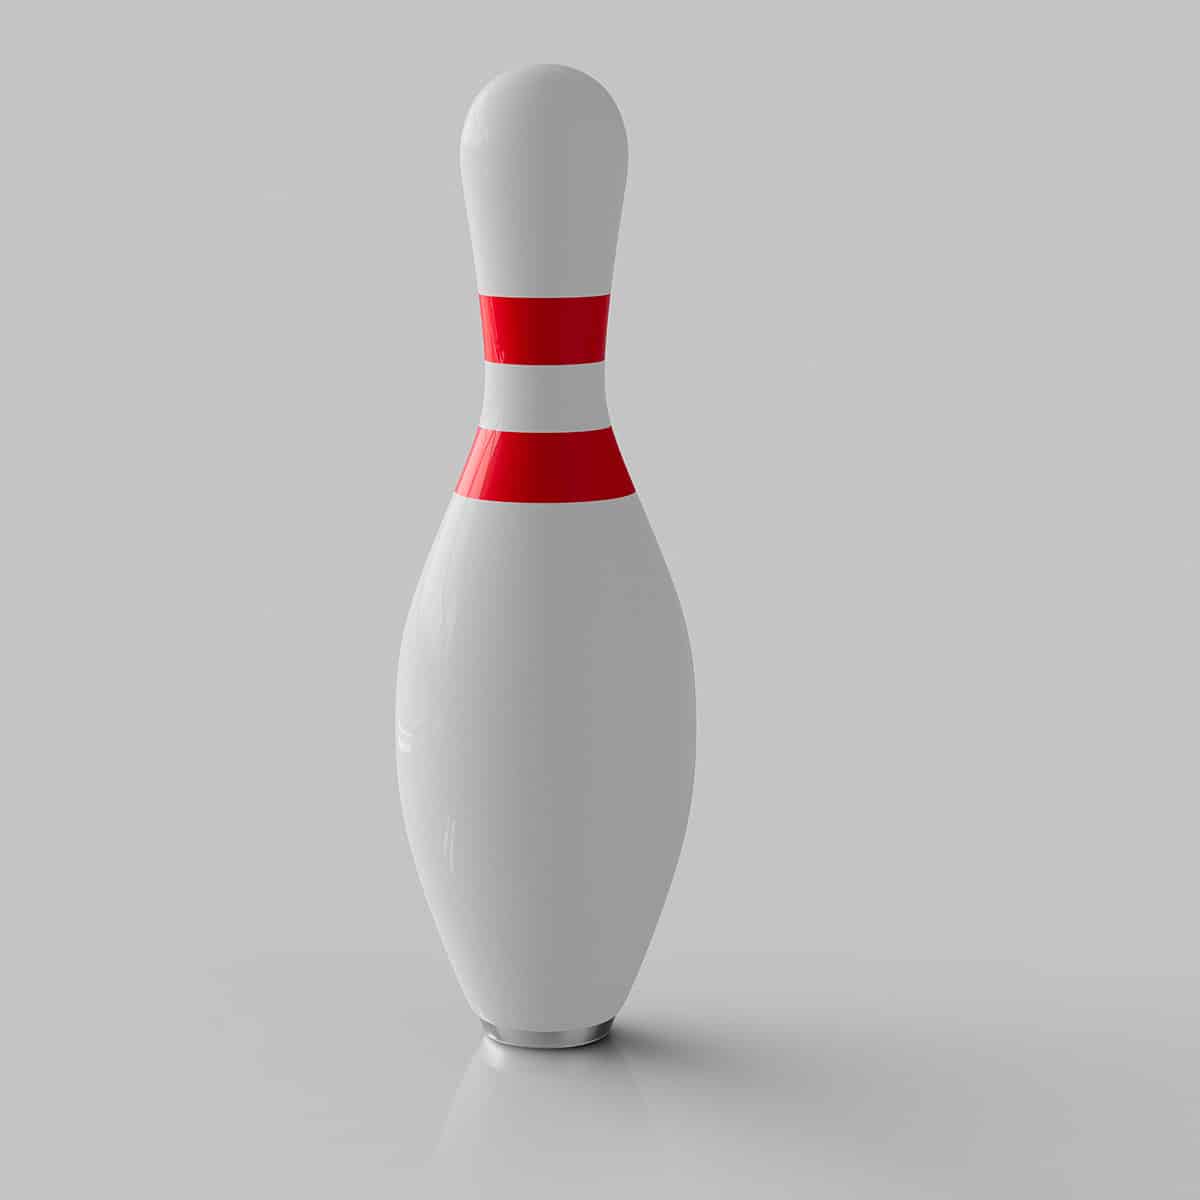 What is a bowling pin